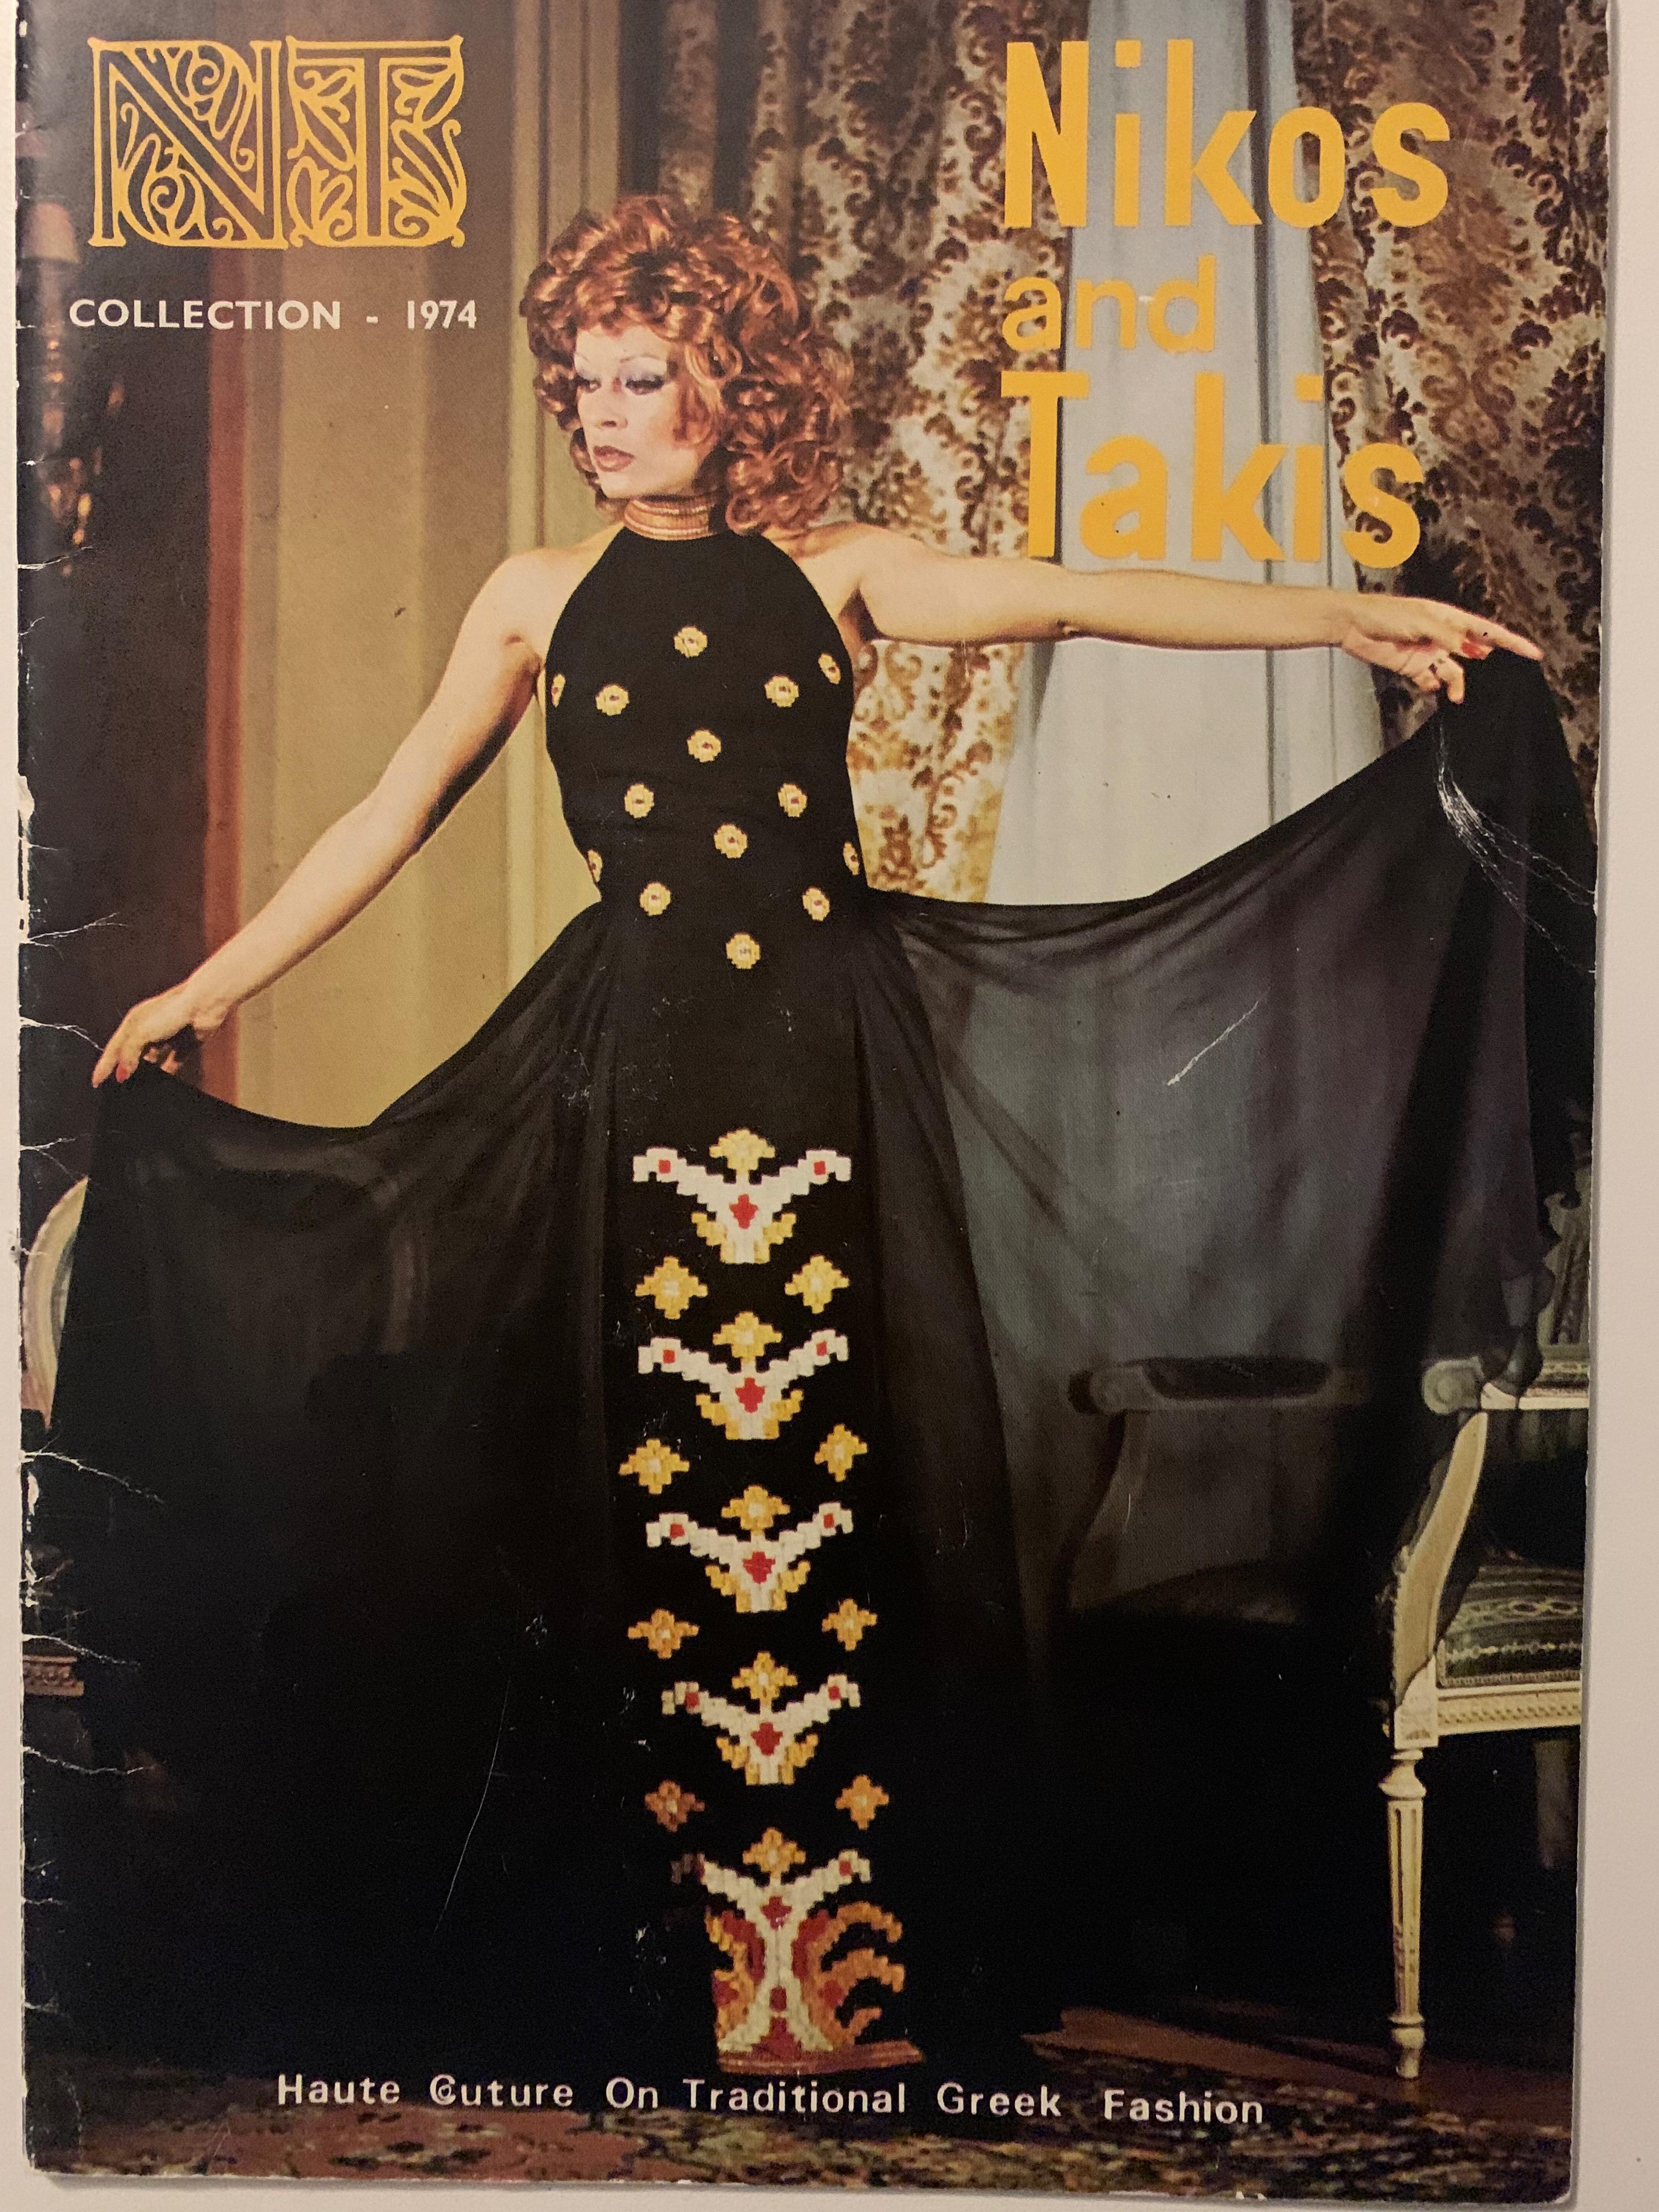 An extraordinary Nikos and Takis Greek couture heavily embroidered gown dating back to their 1974 collection. As shown, this garment was even highlighted on the cover of their lookbook!  The fabric itself is a masterpiece; heavily embroidered brown